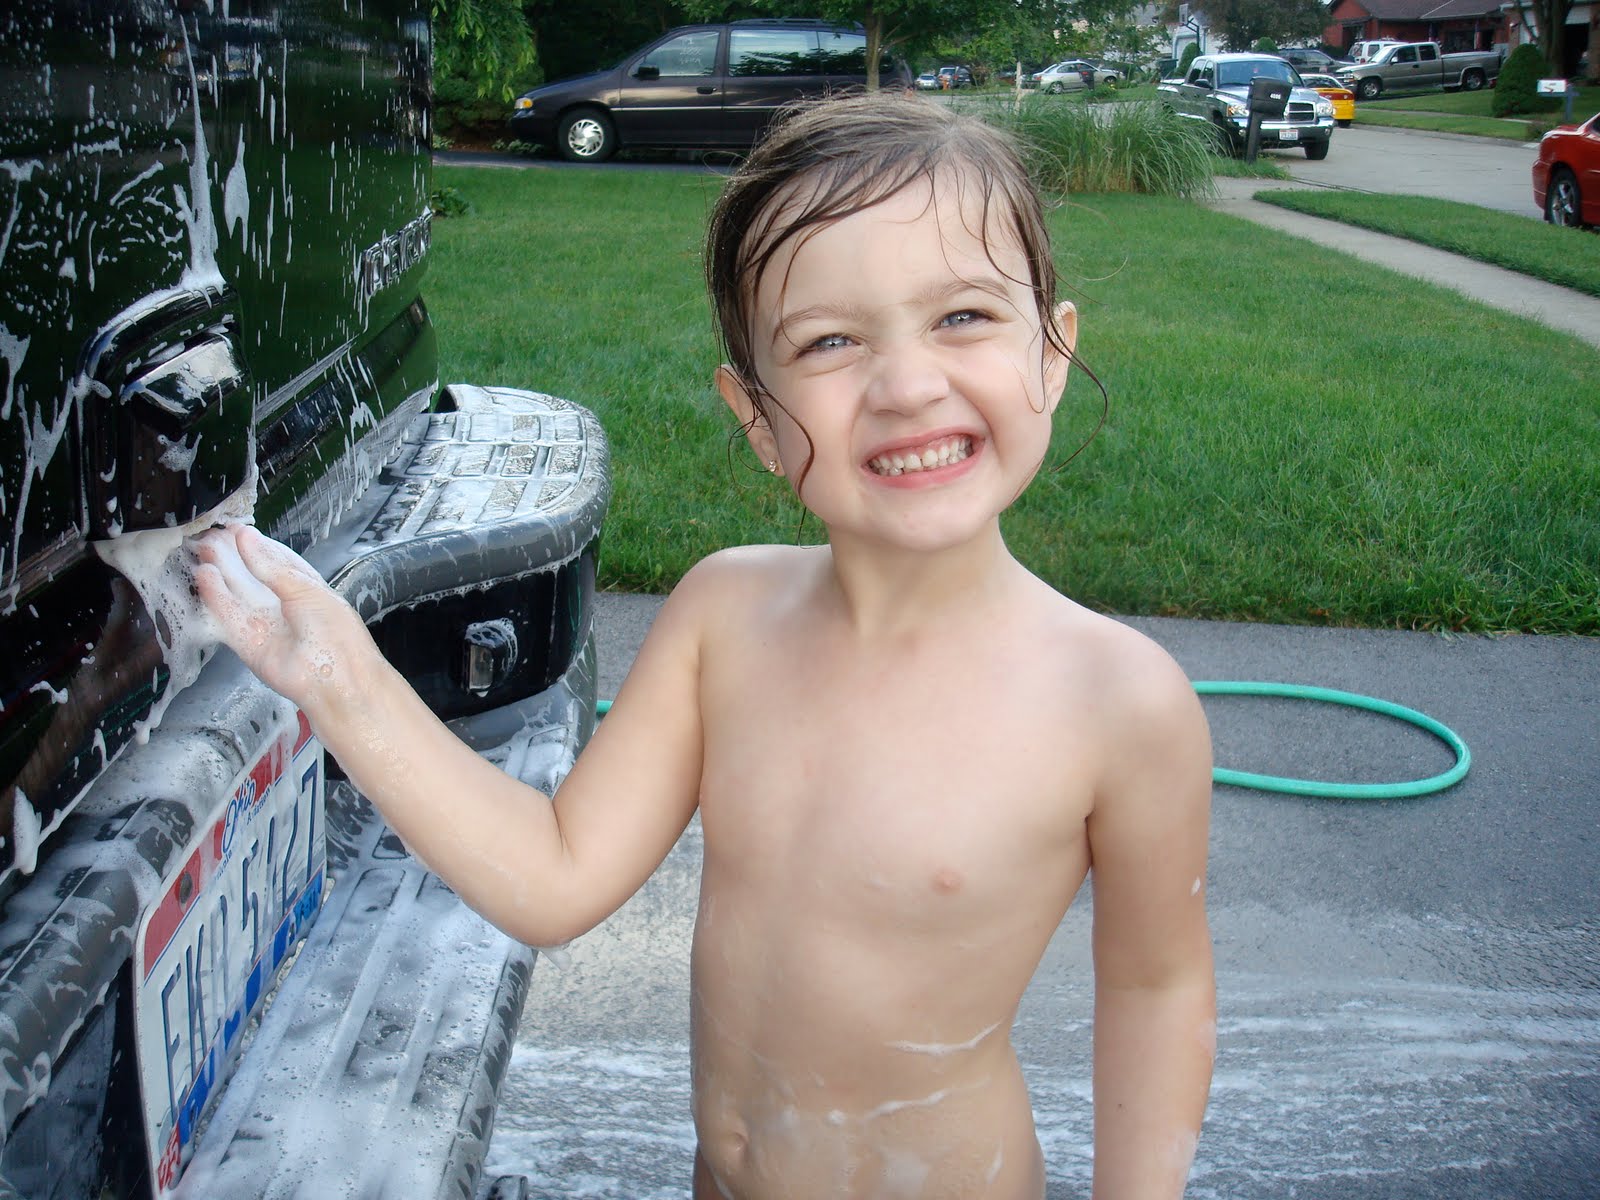 Young Preschool Girl Washing Car On Driveway In Front 